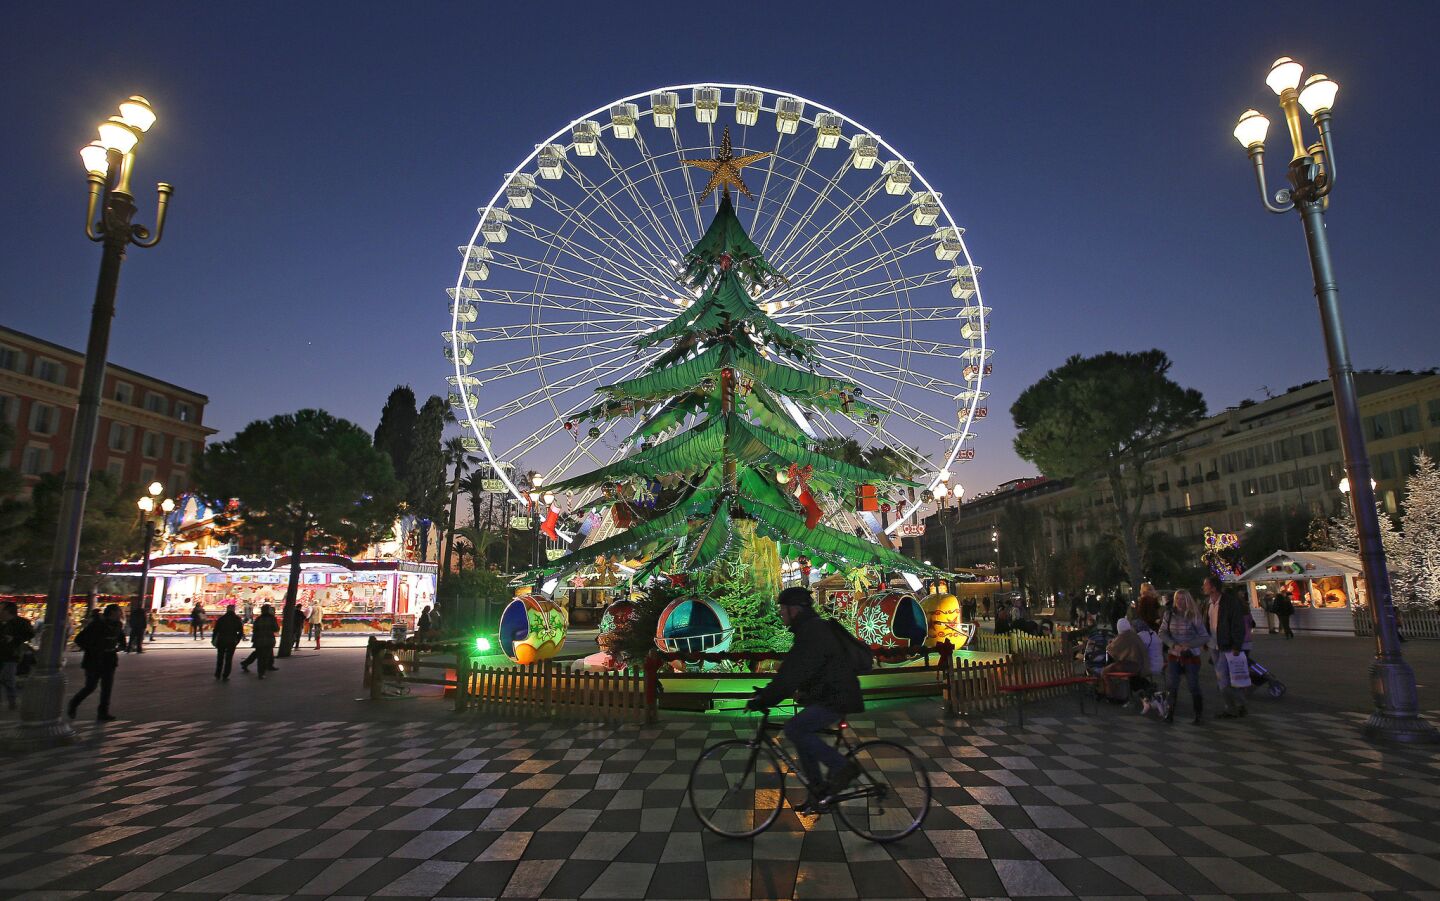 Nearby in the city center, a giant Christmas tree is on display in front of a popular Ferris wheel, giving it a halo effect.